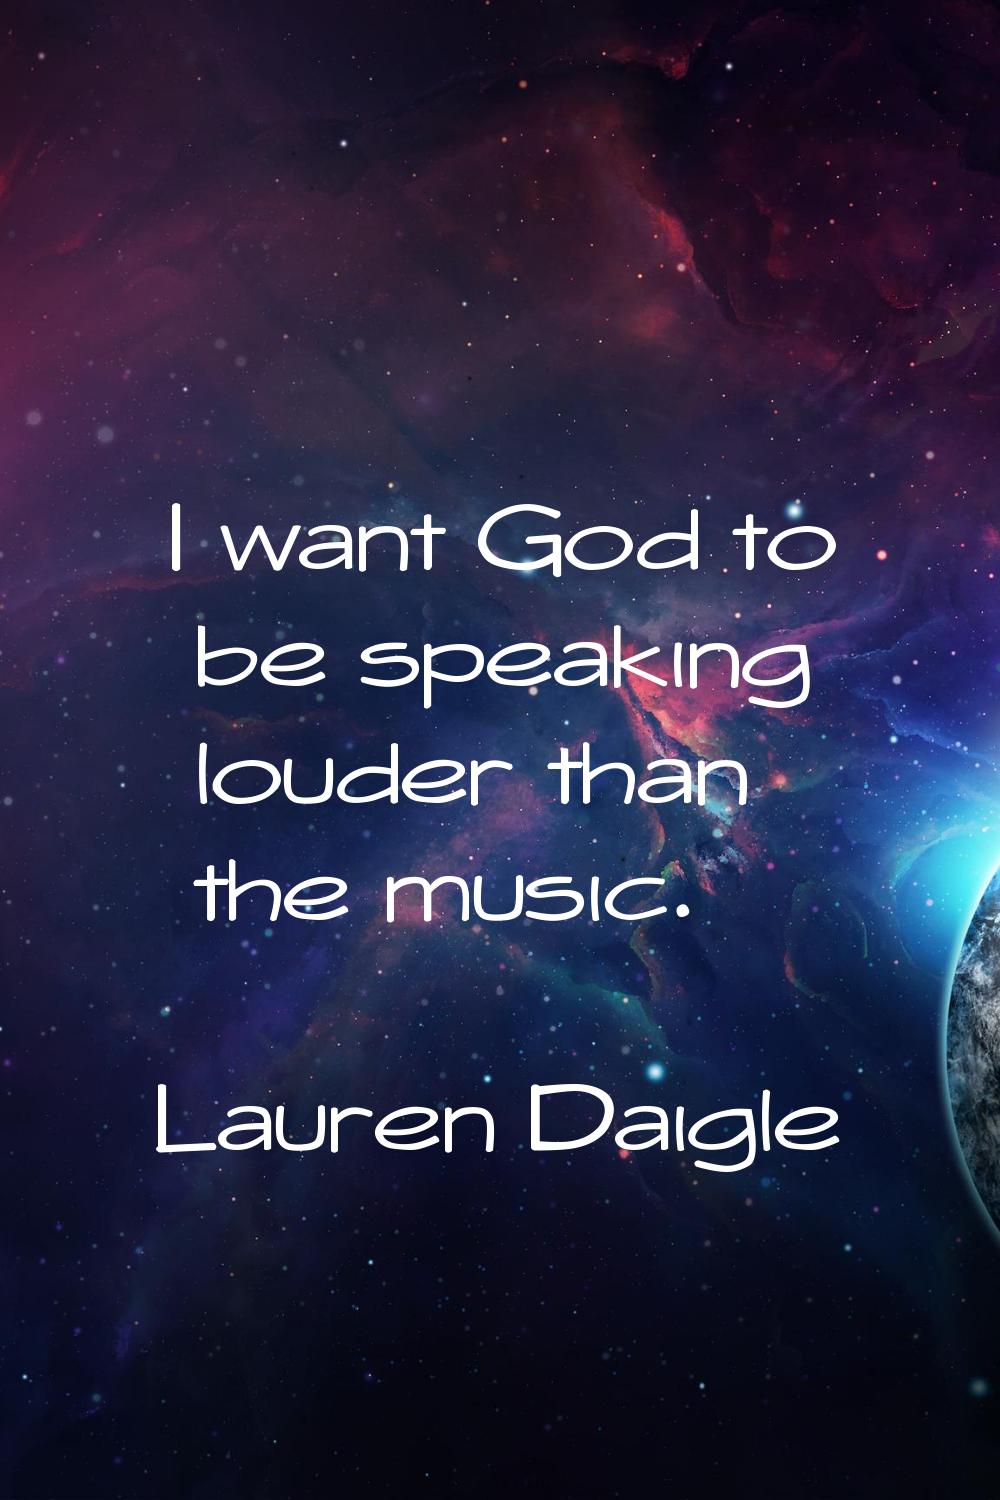 I want God to be speaking louder than the music.